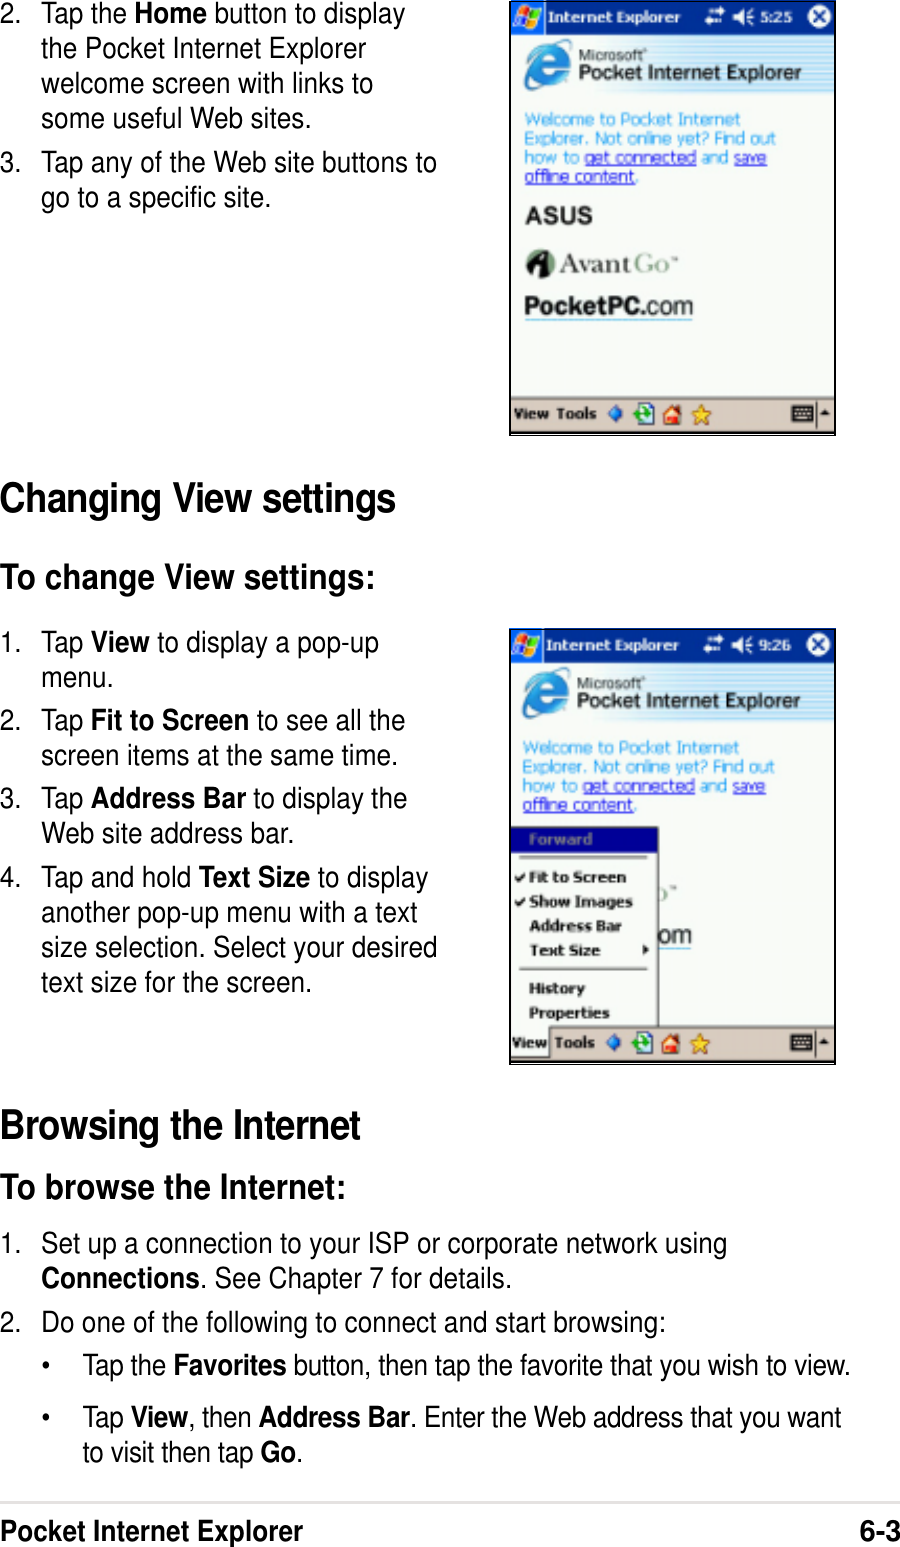 Pocket Internet Explorer6-32. Tap the Home button to displaythe Pocket Internet Explorerwelcome screen with links tosome useful Web sites.3. Tap any of the Web site buttons togo to a specific site.Changing View settingsTo change View settings:1. Tap View to display a pop-upmenu.2. Tap Fit to Screen to see all thescreen items at the same time.3. Tap Address Bar to display theWeb site address bar.4. Tap and hold Text Size to displayanother pop-up menu with a textsize selection. Select your desiredtext size for the screen.Browsing the InternetTo browse the Internet:1. Set up a connection to your ISP or corporate network usingConnections. See Chapter 7 for details.2. Do one of the following to connect and start browsing:•Tap the Favorites button, then tap the favorite that you wish to view.•Tap View, then Address Bar. Enter the Web address that you wantto visit then tap Go.